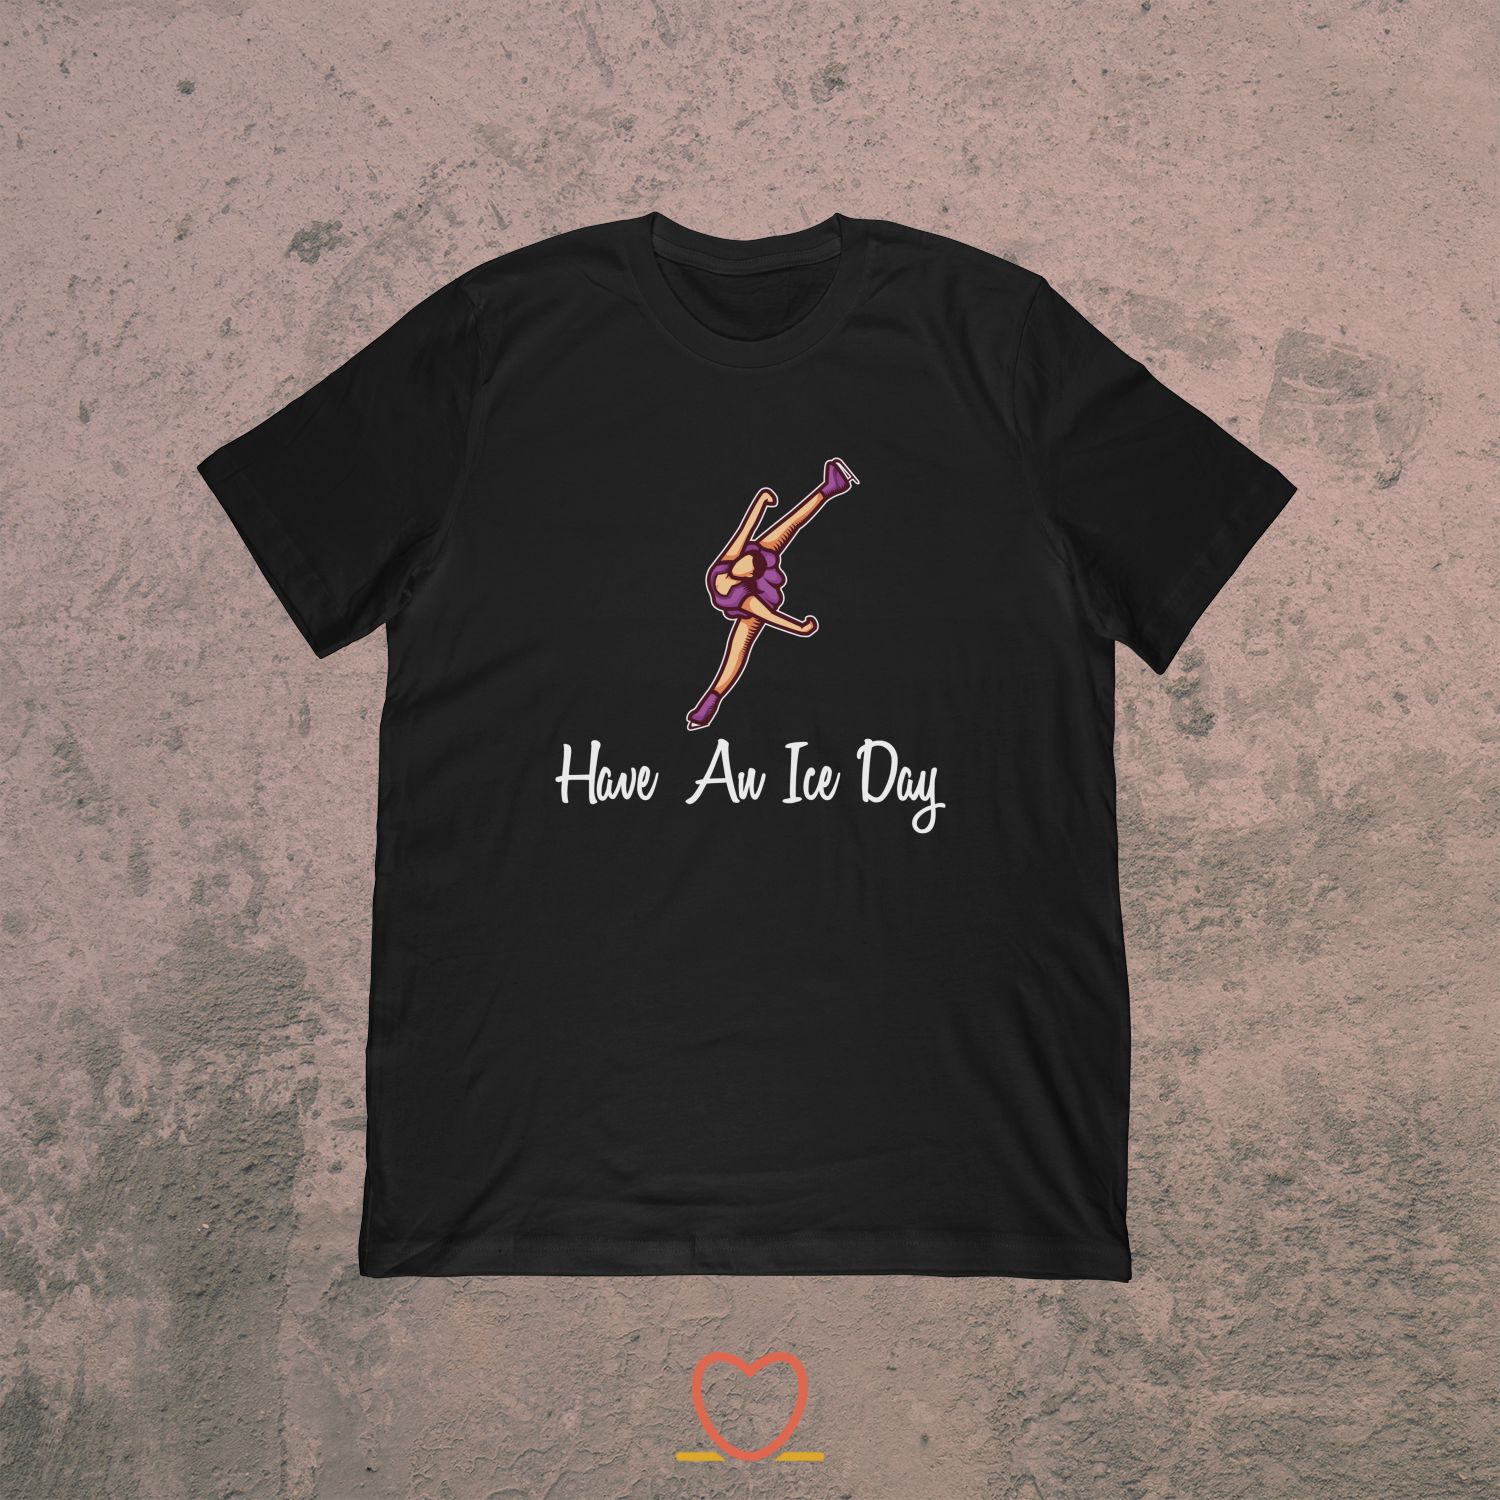 Have An Ice Day – Ice And Figure Skating Tee